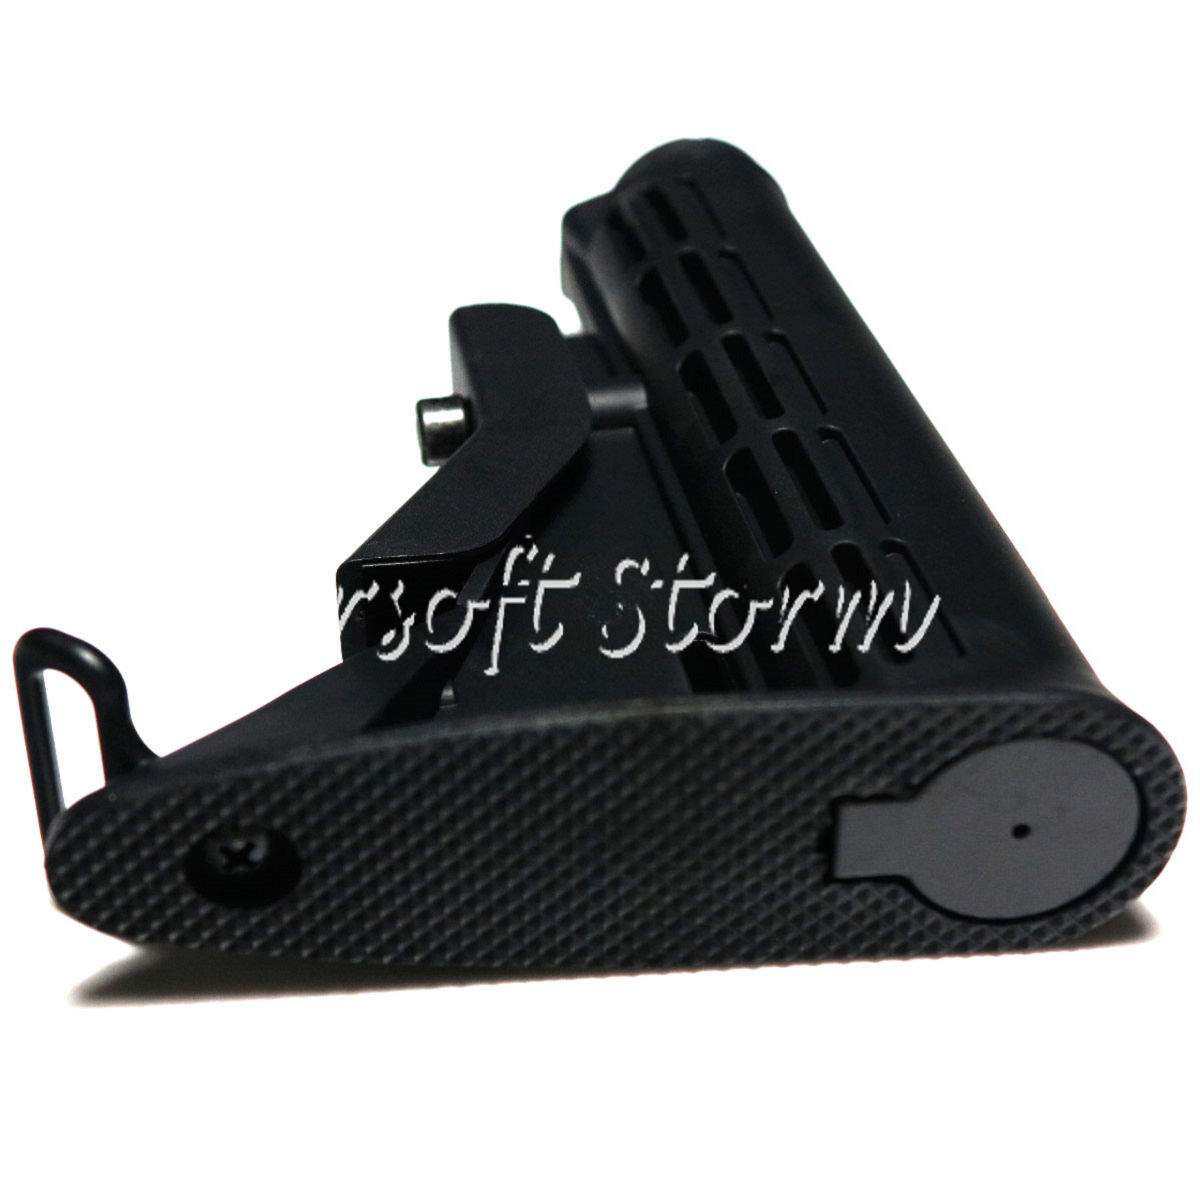 Airsoft Tactical Gear E&C 6 Position Sliding Stock with Pipe for HK416/M4/M16 AEG